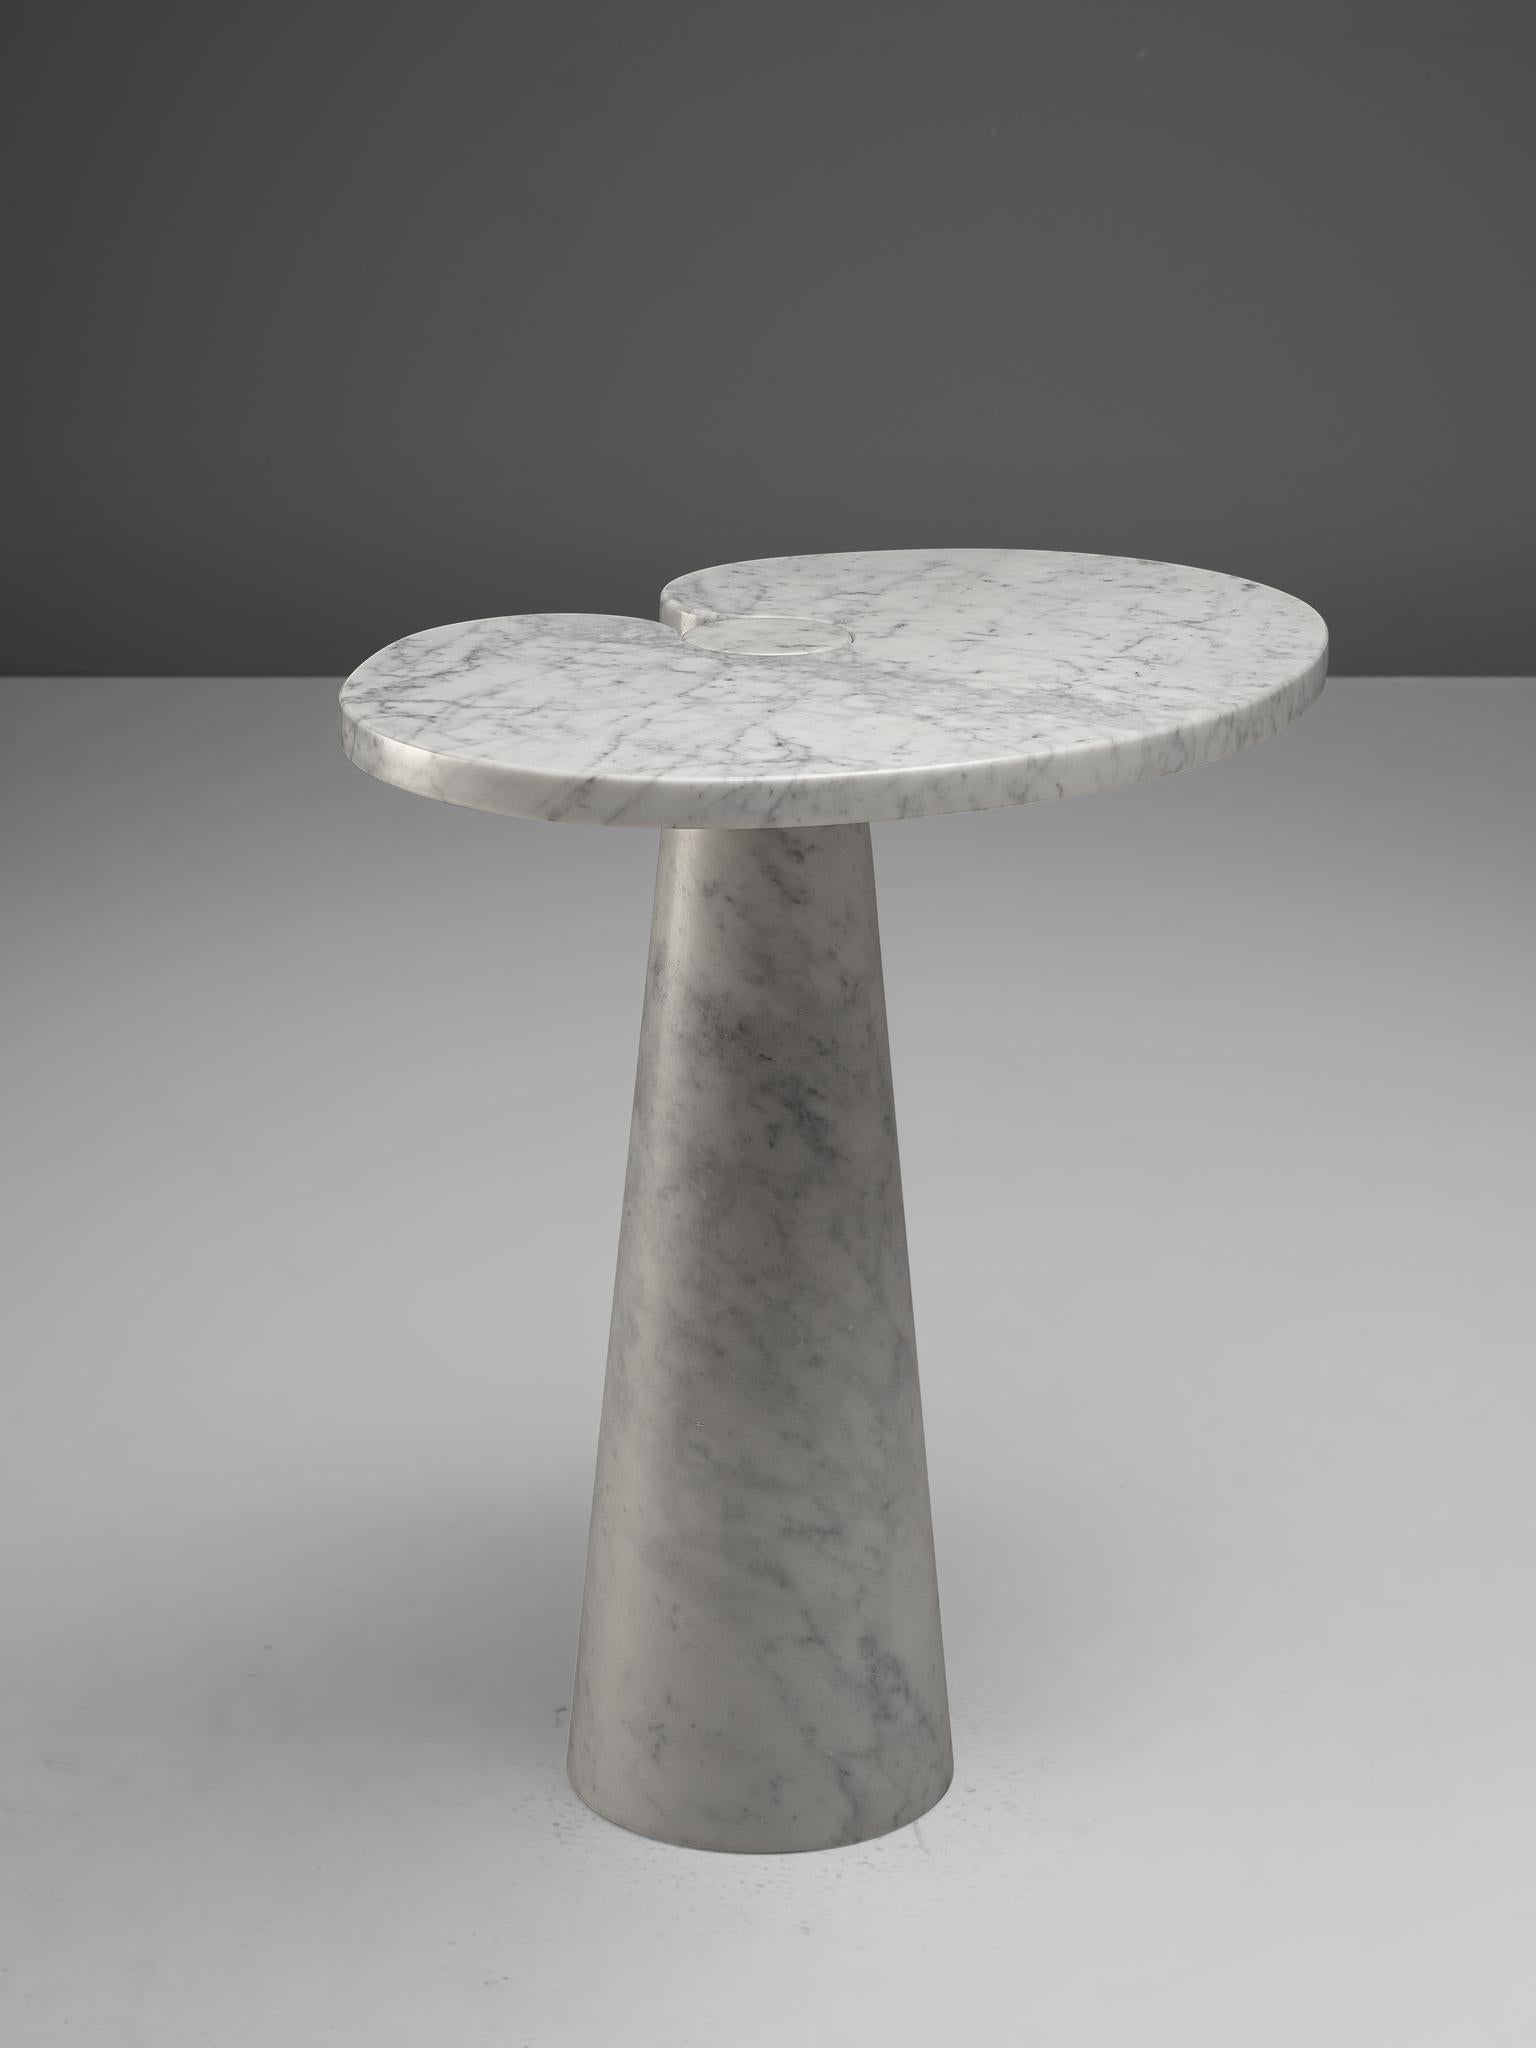 Angelo Mangiarotti, cocktail table in white marble, Italy, 1970s. 

This sculptural table by Angelo Mangiarotti is a skillful example of postmodern design. The lotus leaf like side table features no joints or clamps and is architectural in its